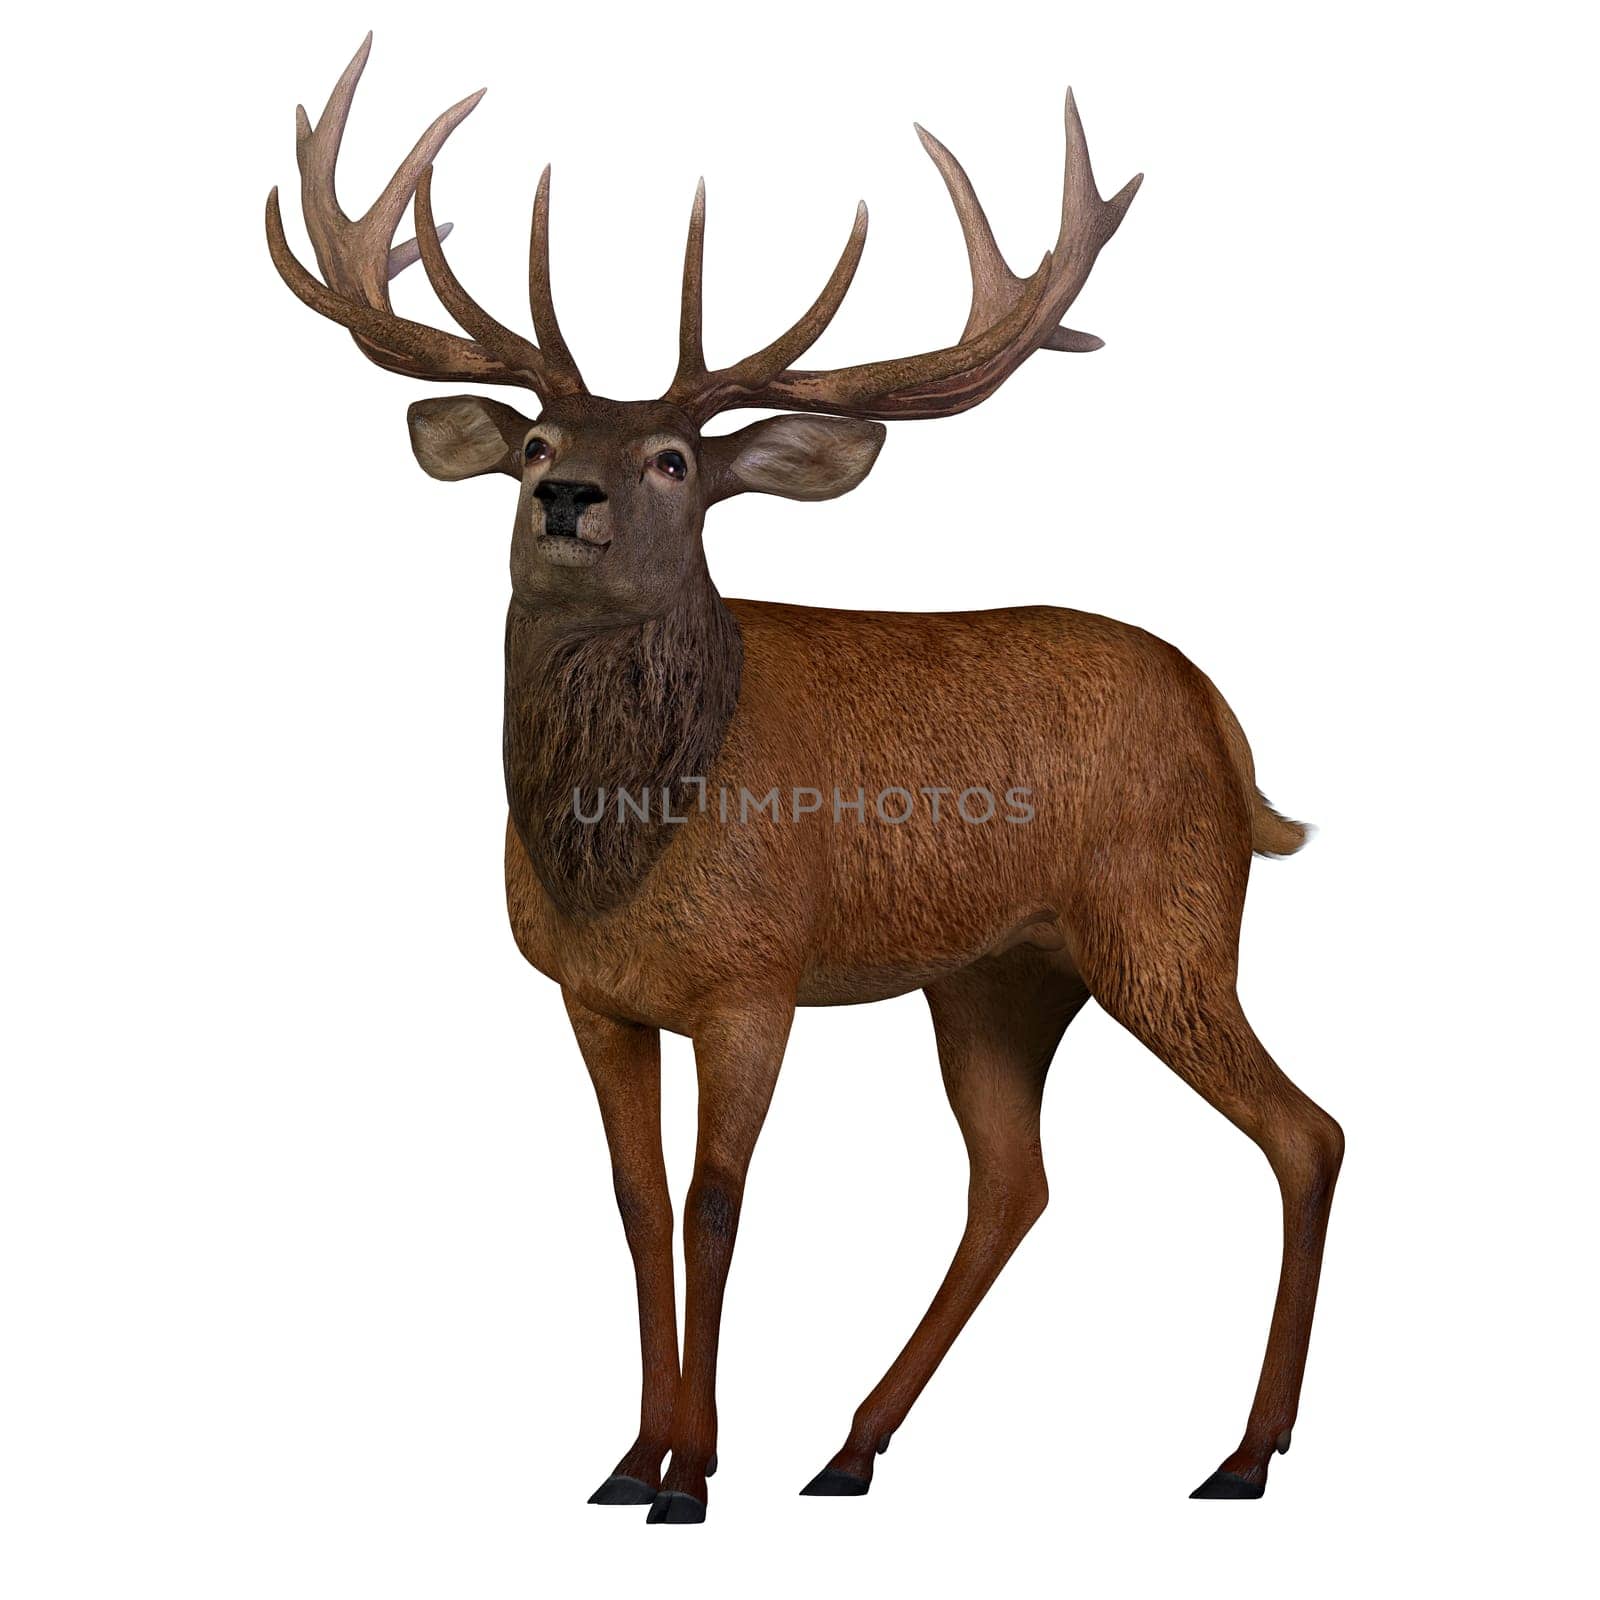 The Red deer is native to Europe, Asia, Iran and Africa is one of the largest species of ungulates.